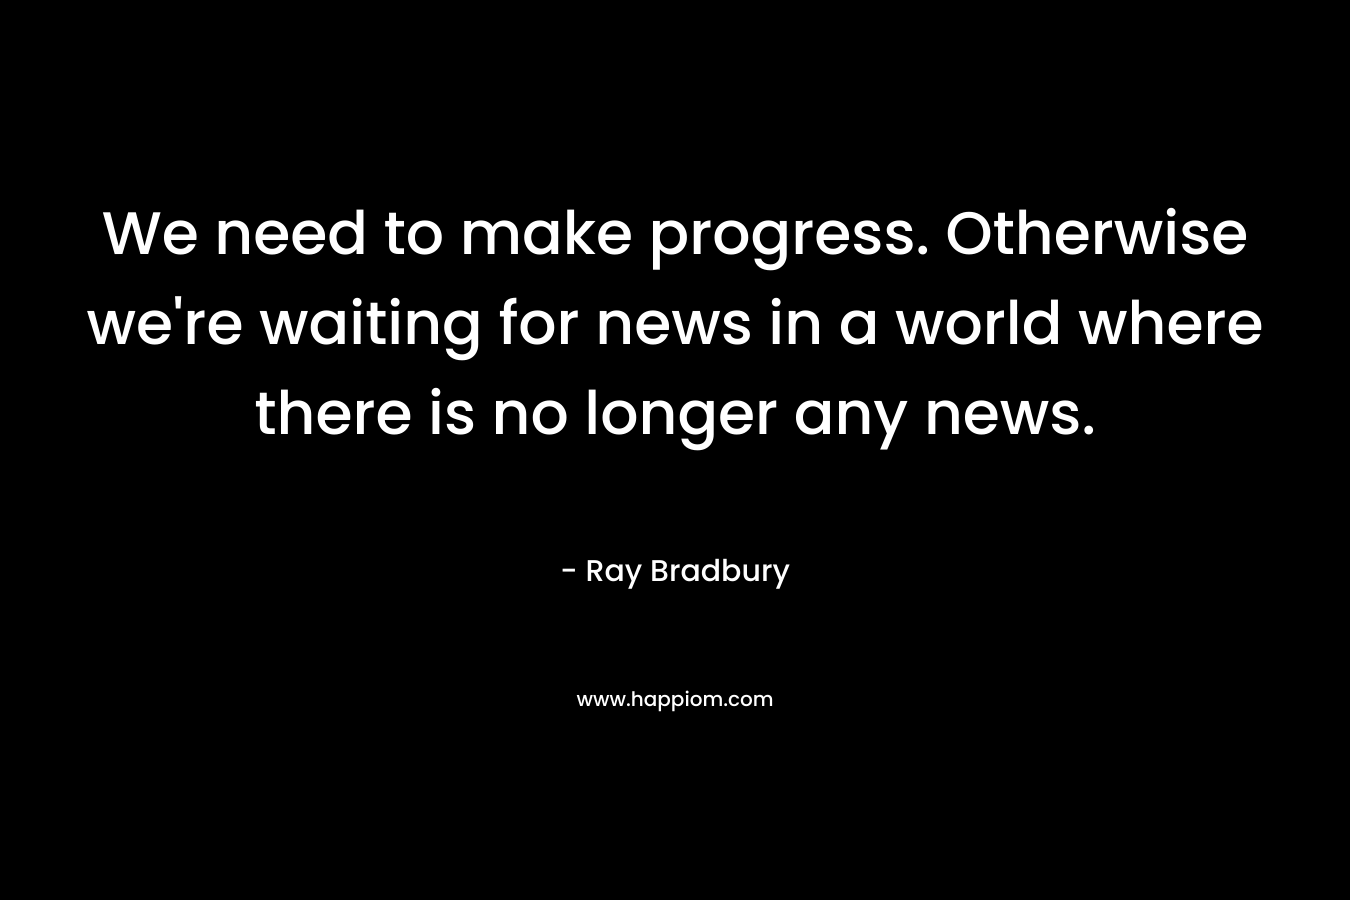 We need to make progress. Otherwise we're waiting for news in a world where there is no longer any news.